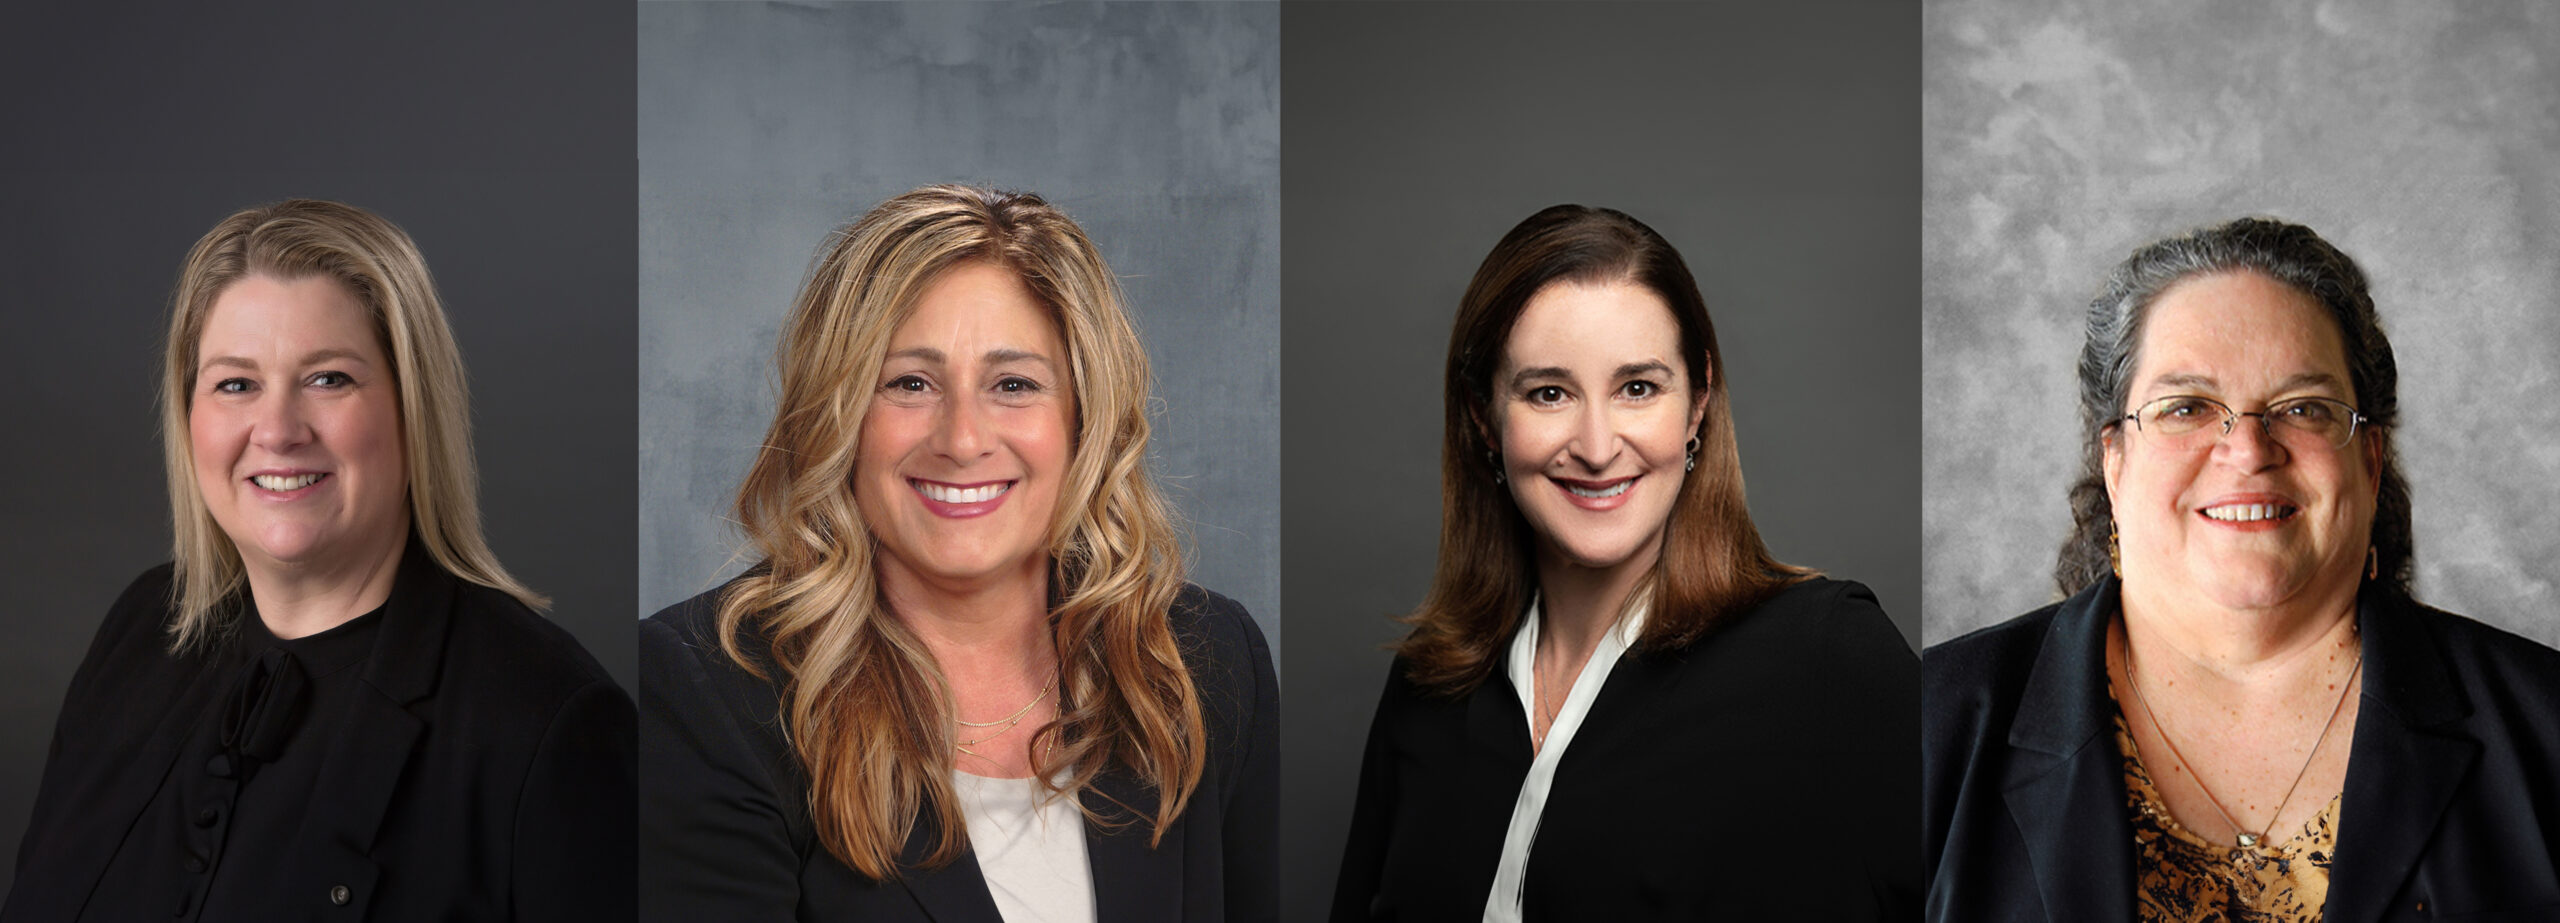 In Celebration of Women’s History Month, Finopotamus Recognized Samaha & Associates’ Disa D’Andrea, Tracy Helm, Janeace Liles and Olivia Reynolds